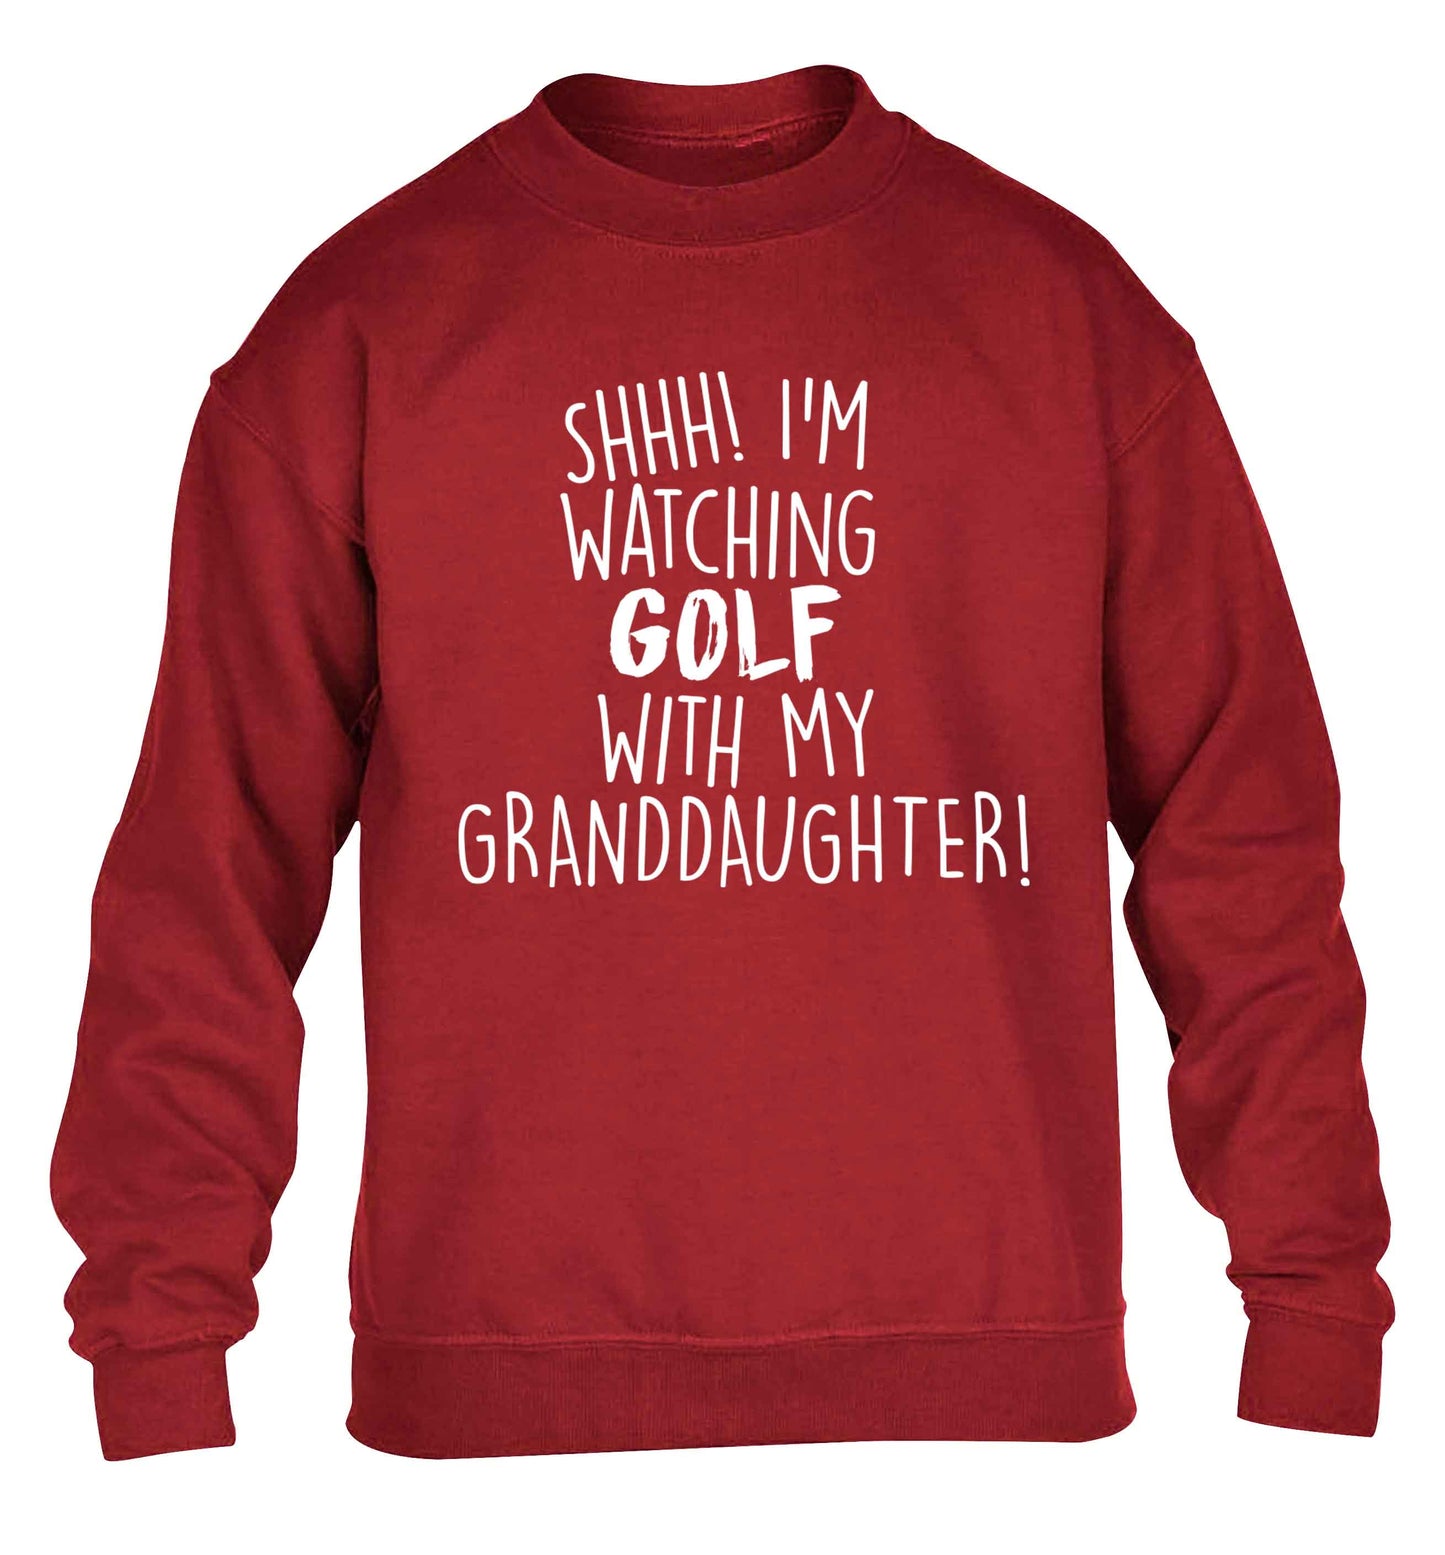 Shh I'm watching golf with my granddaughter children's grey sweater 12-13 Years